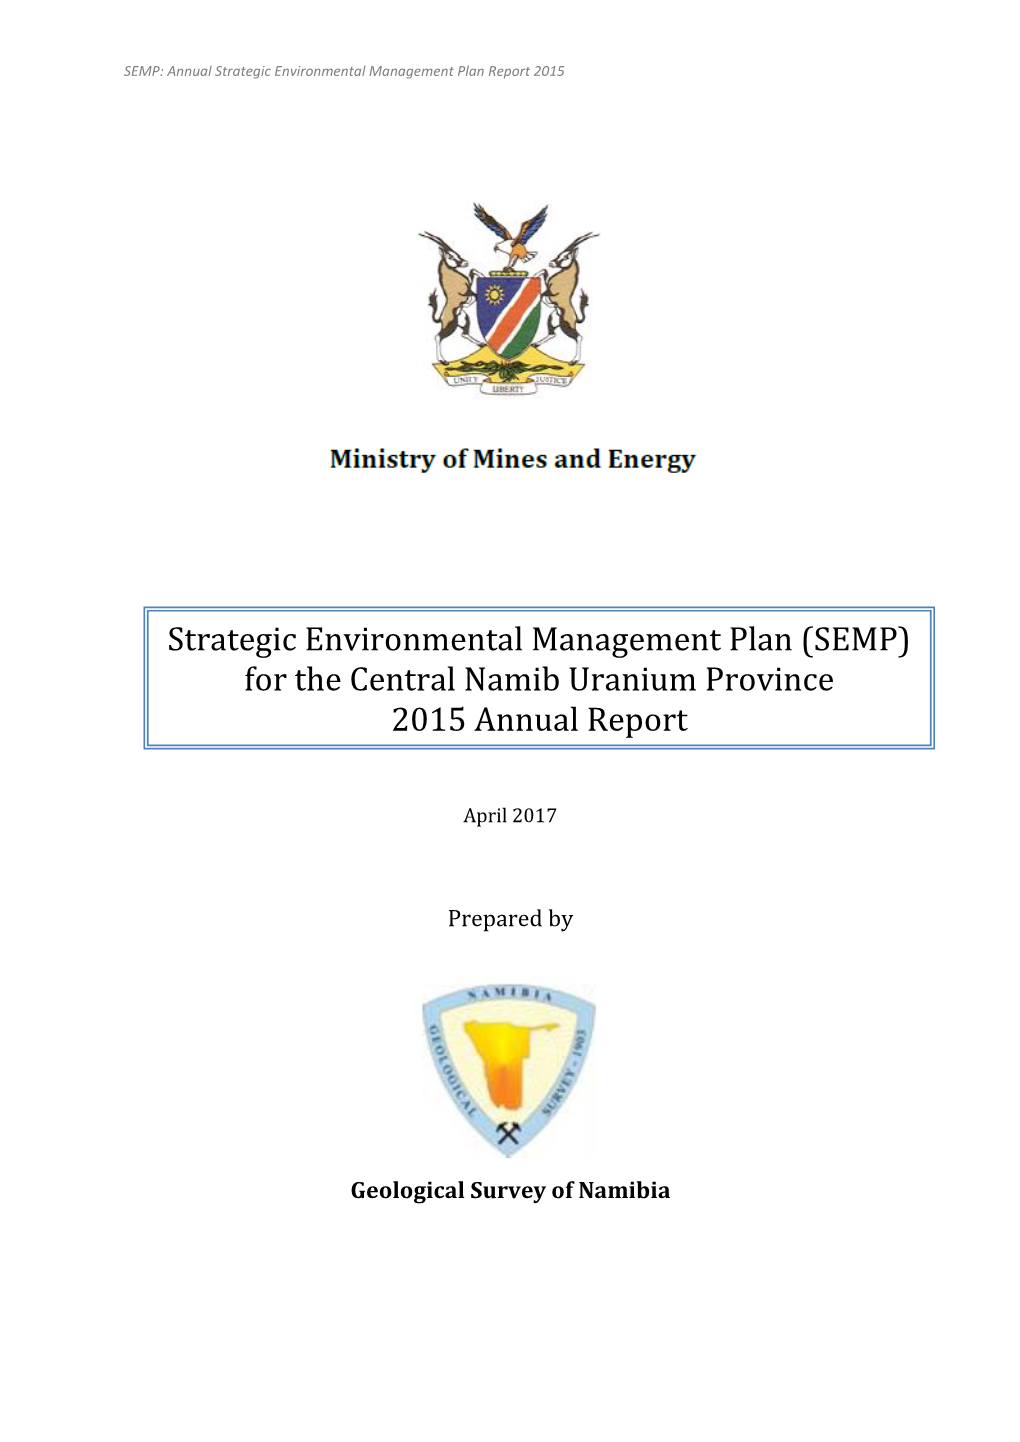 For the Central Namib Uranium Province 2015 Annual Report